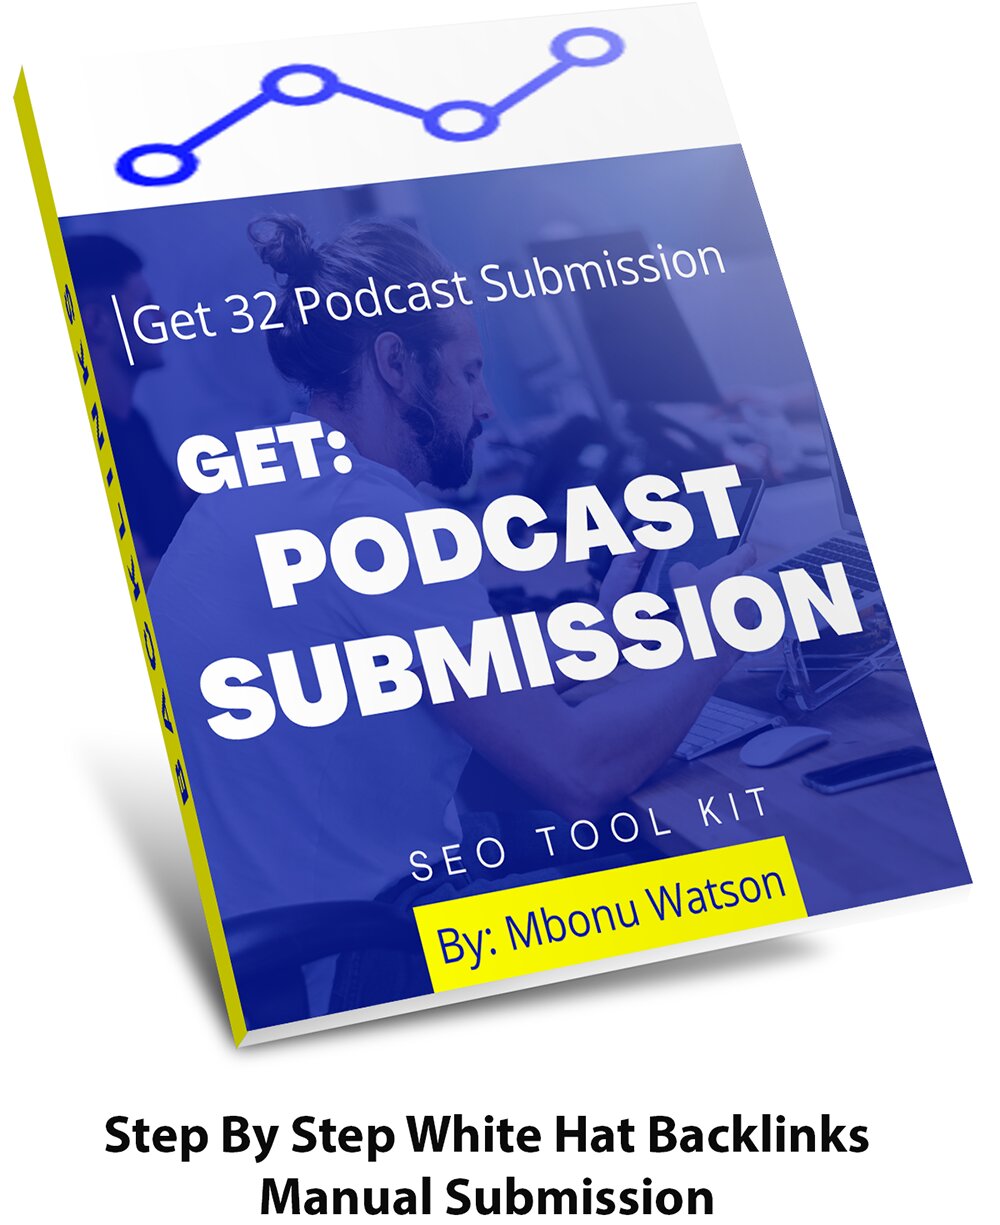 list of Podcast Submission websites, worldsocio.jpg